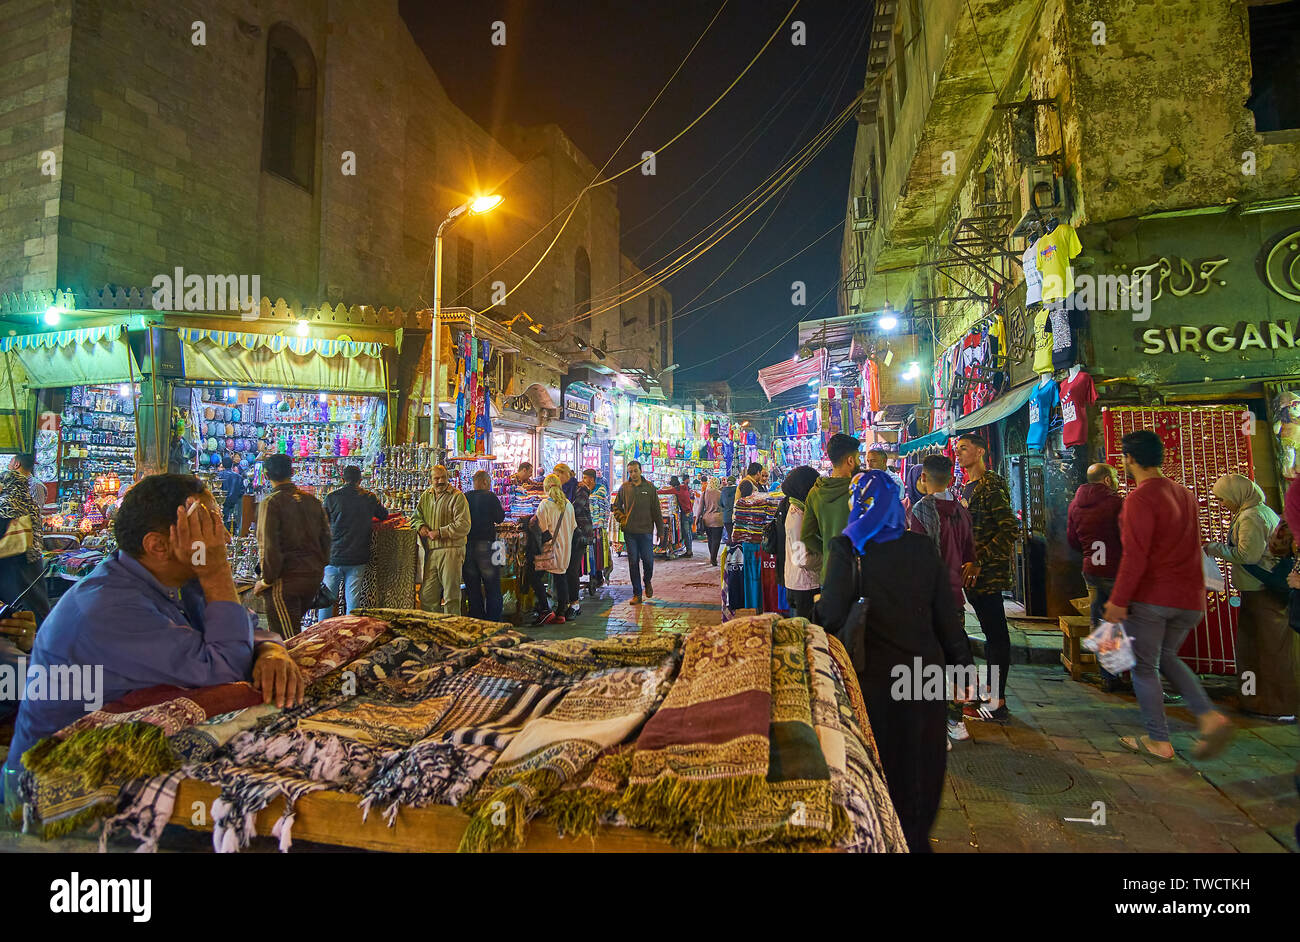 CAIRO, EGYPT - DECEMBER 22, 2017: The crowded evening street of Khan EL Khalili market with multiple illuminated stores and the traditional scarfs' st Stock Photo